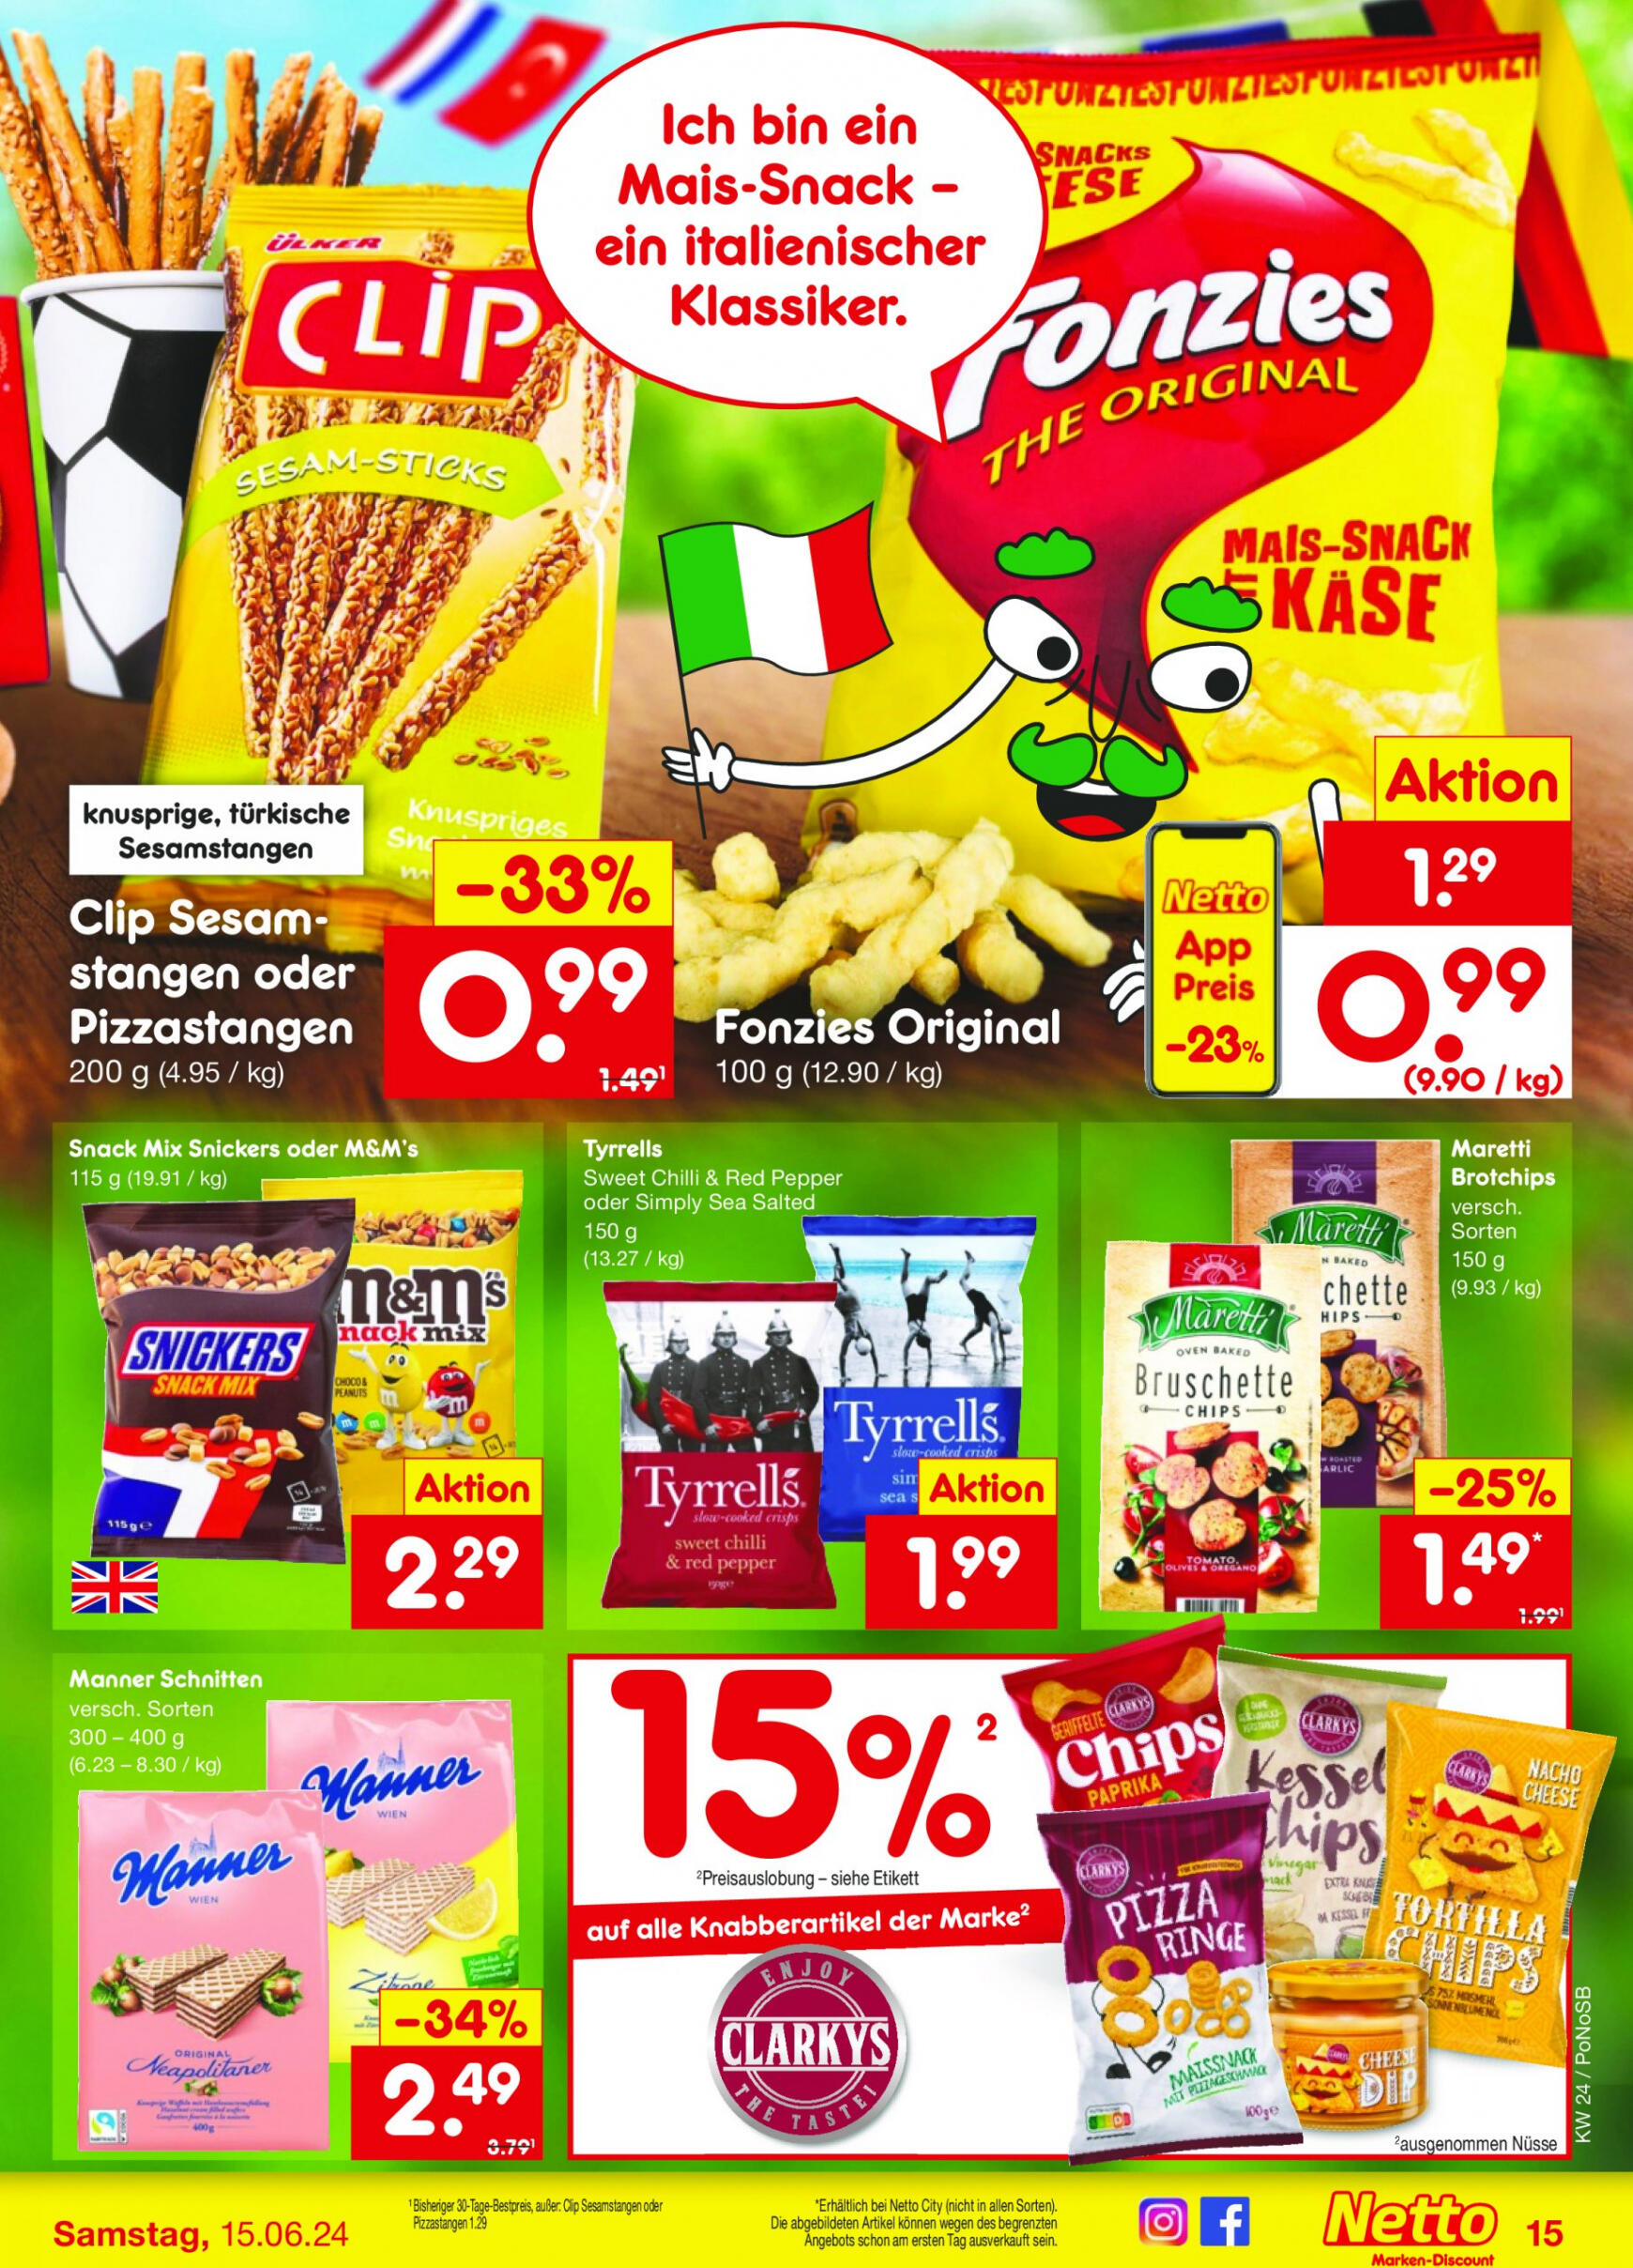 netto - Flyer Netto aktuell 10.06. - 15.06. - page: 17